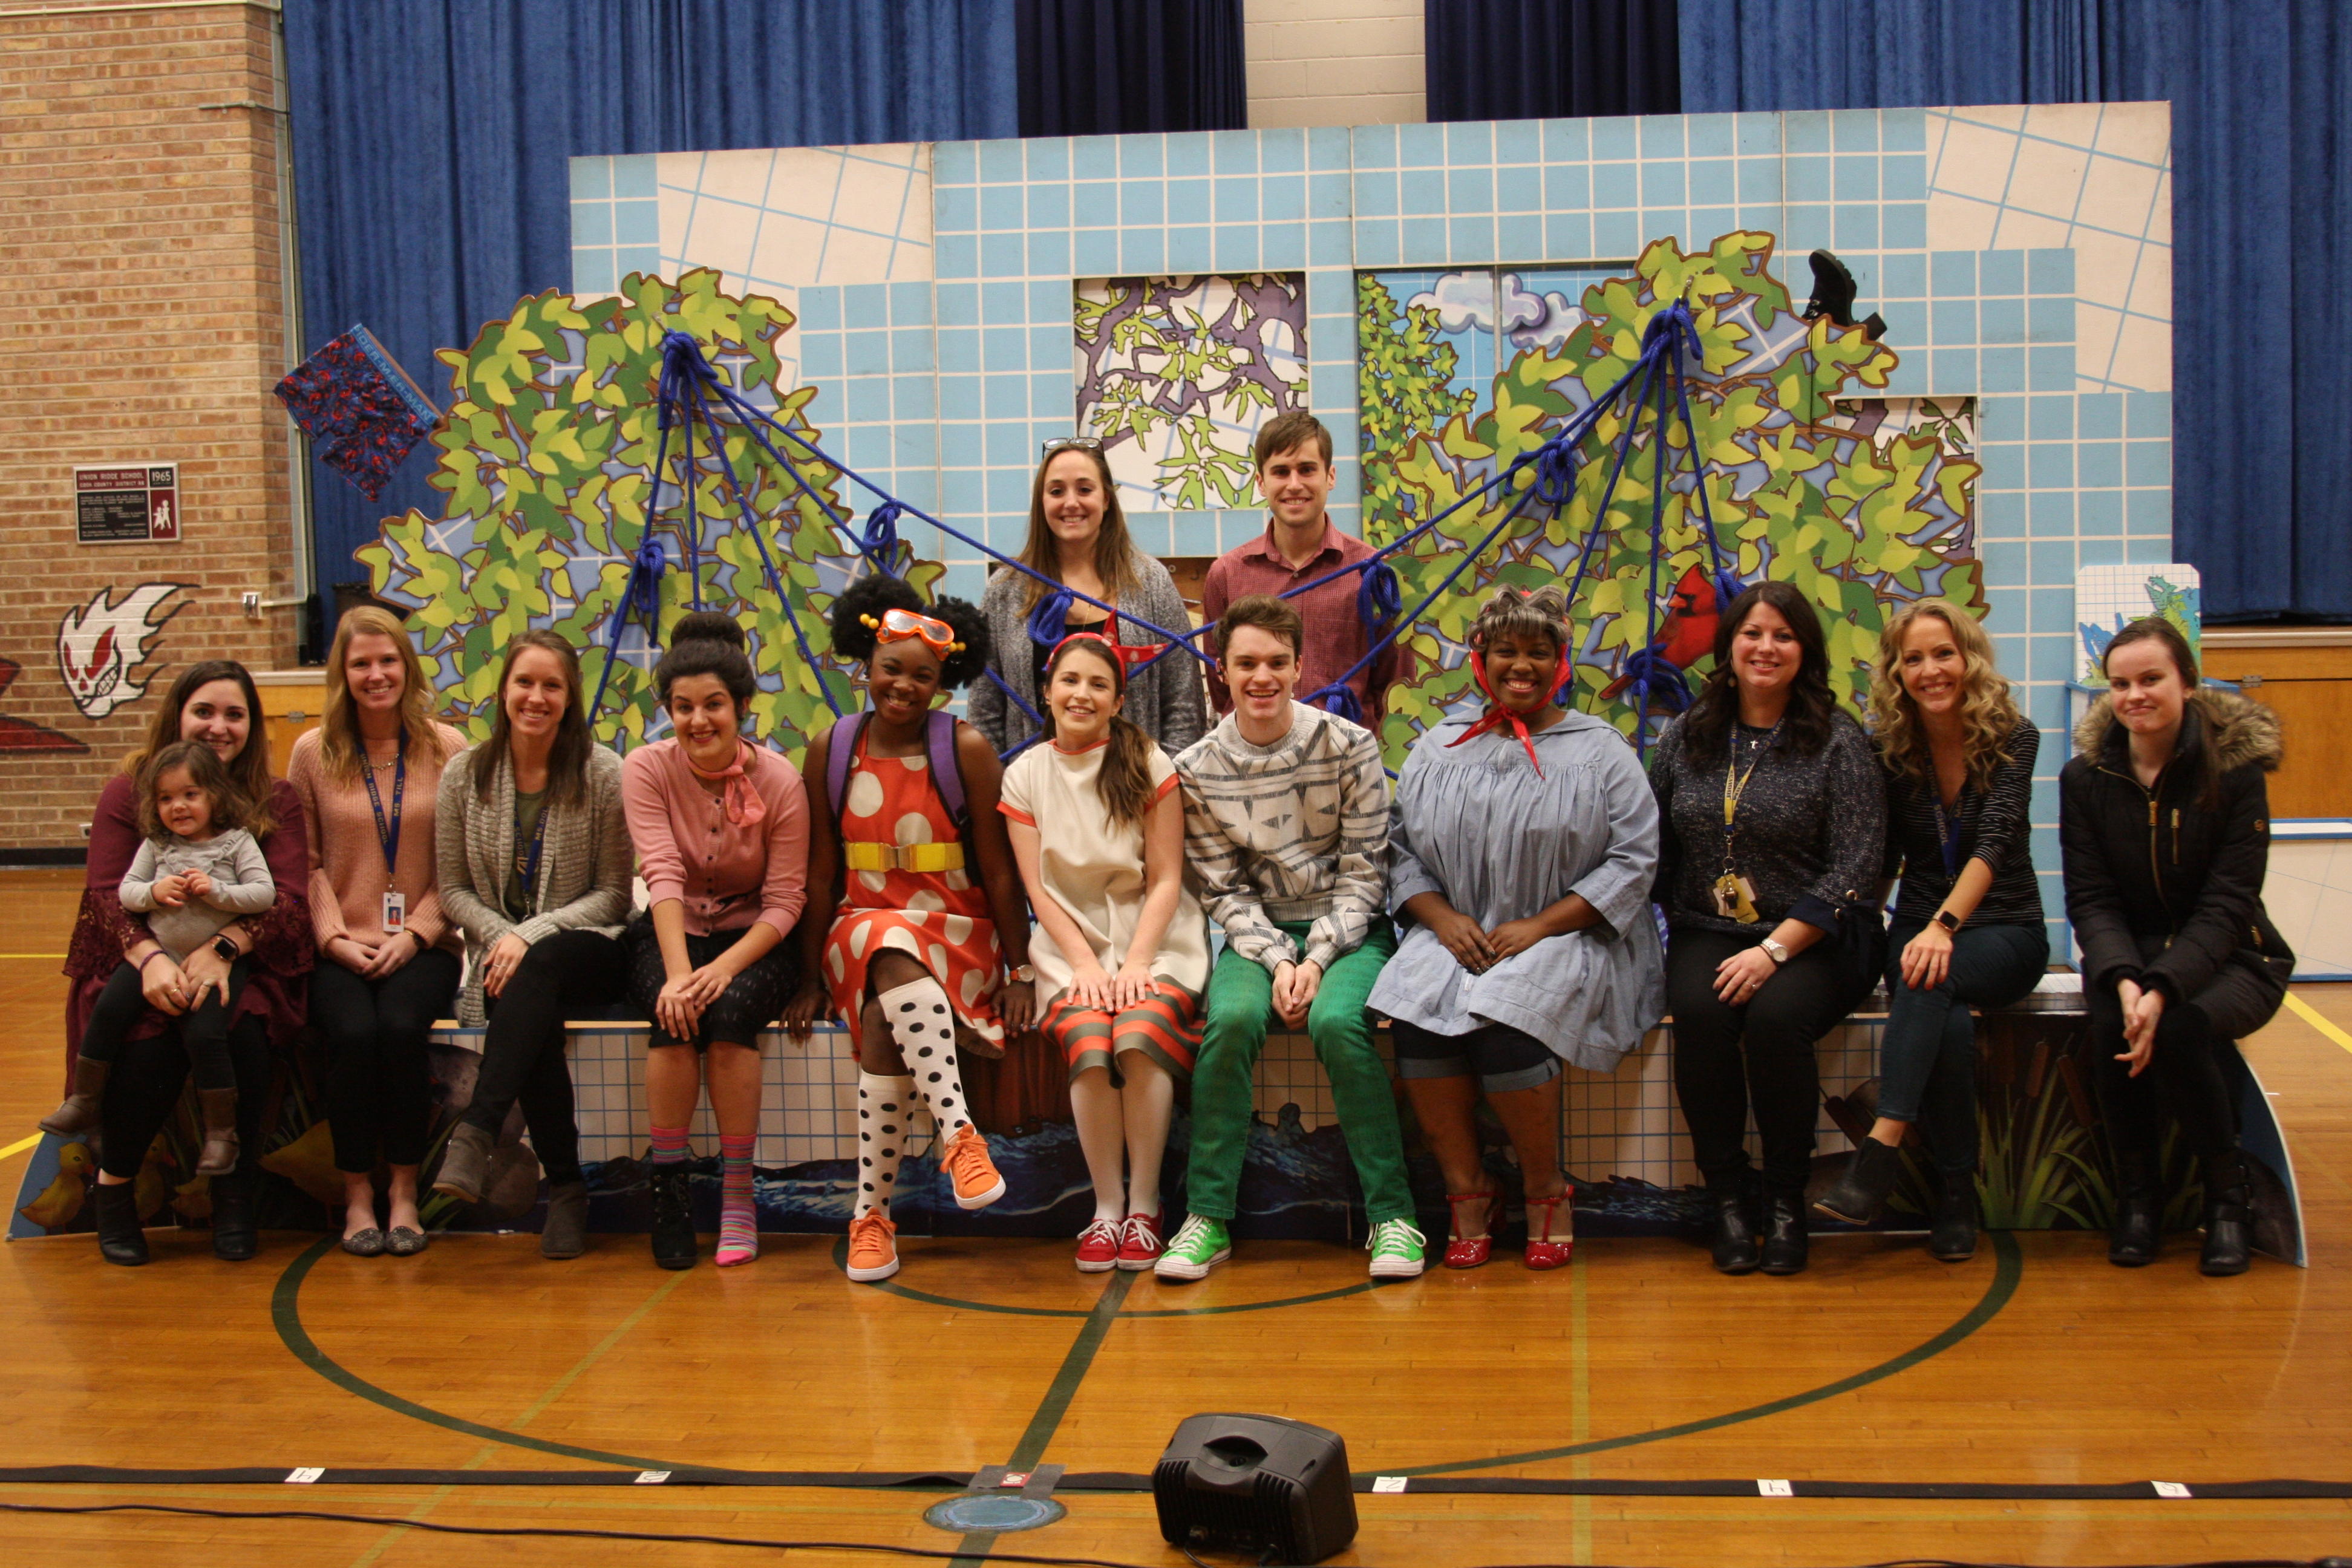 Young Author Committee and the cast of Rosie Revere posting for a group picture